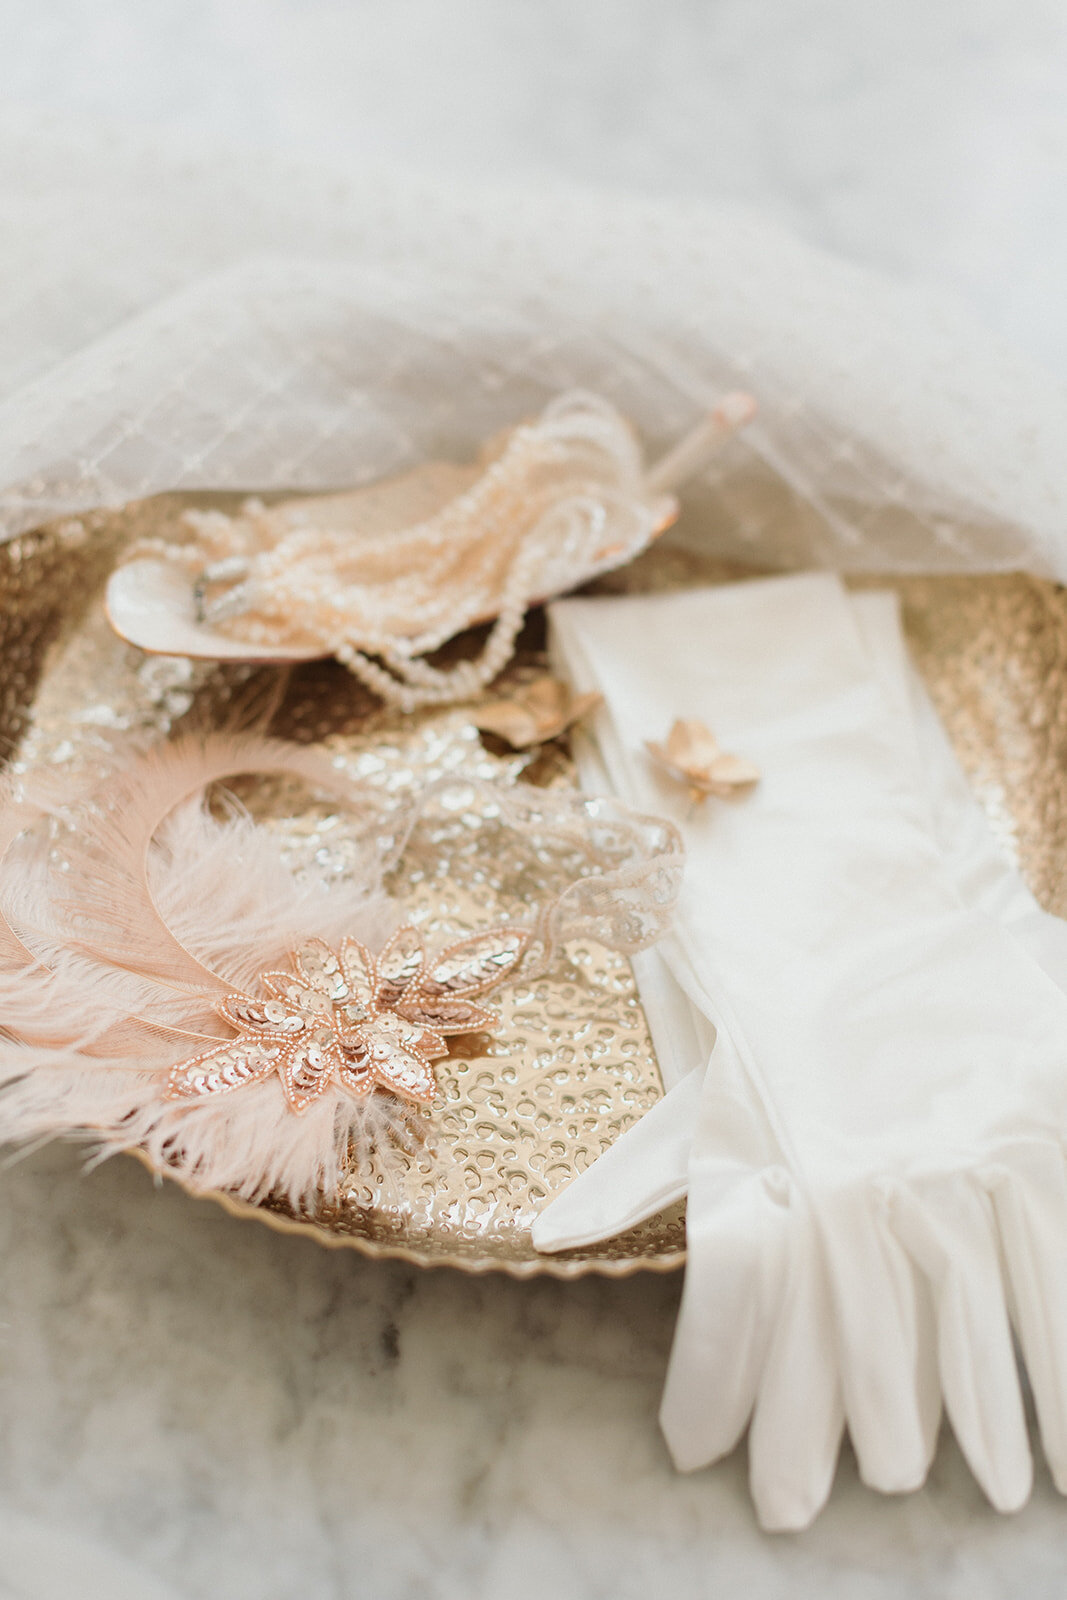 close up photo of dressing items on a gold tray, including white glove, feathered hairpieces and jewelry.